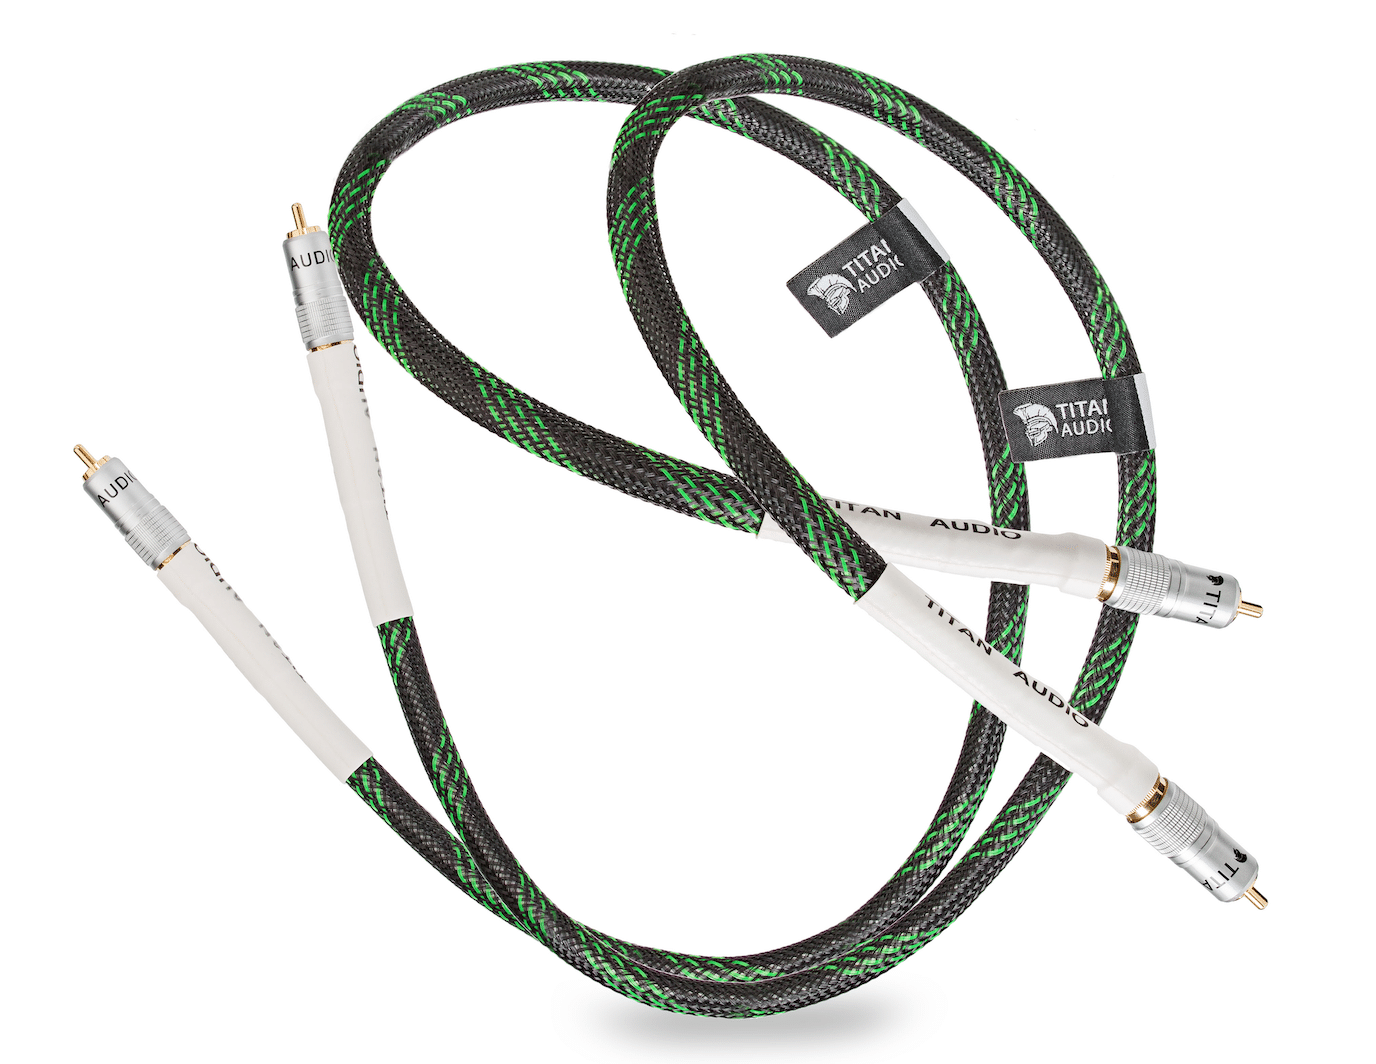 Styx Cables & Lifts From Titan Audio 